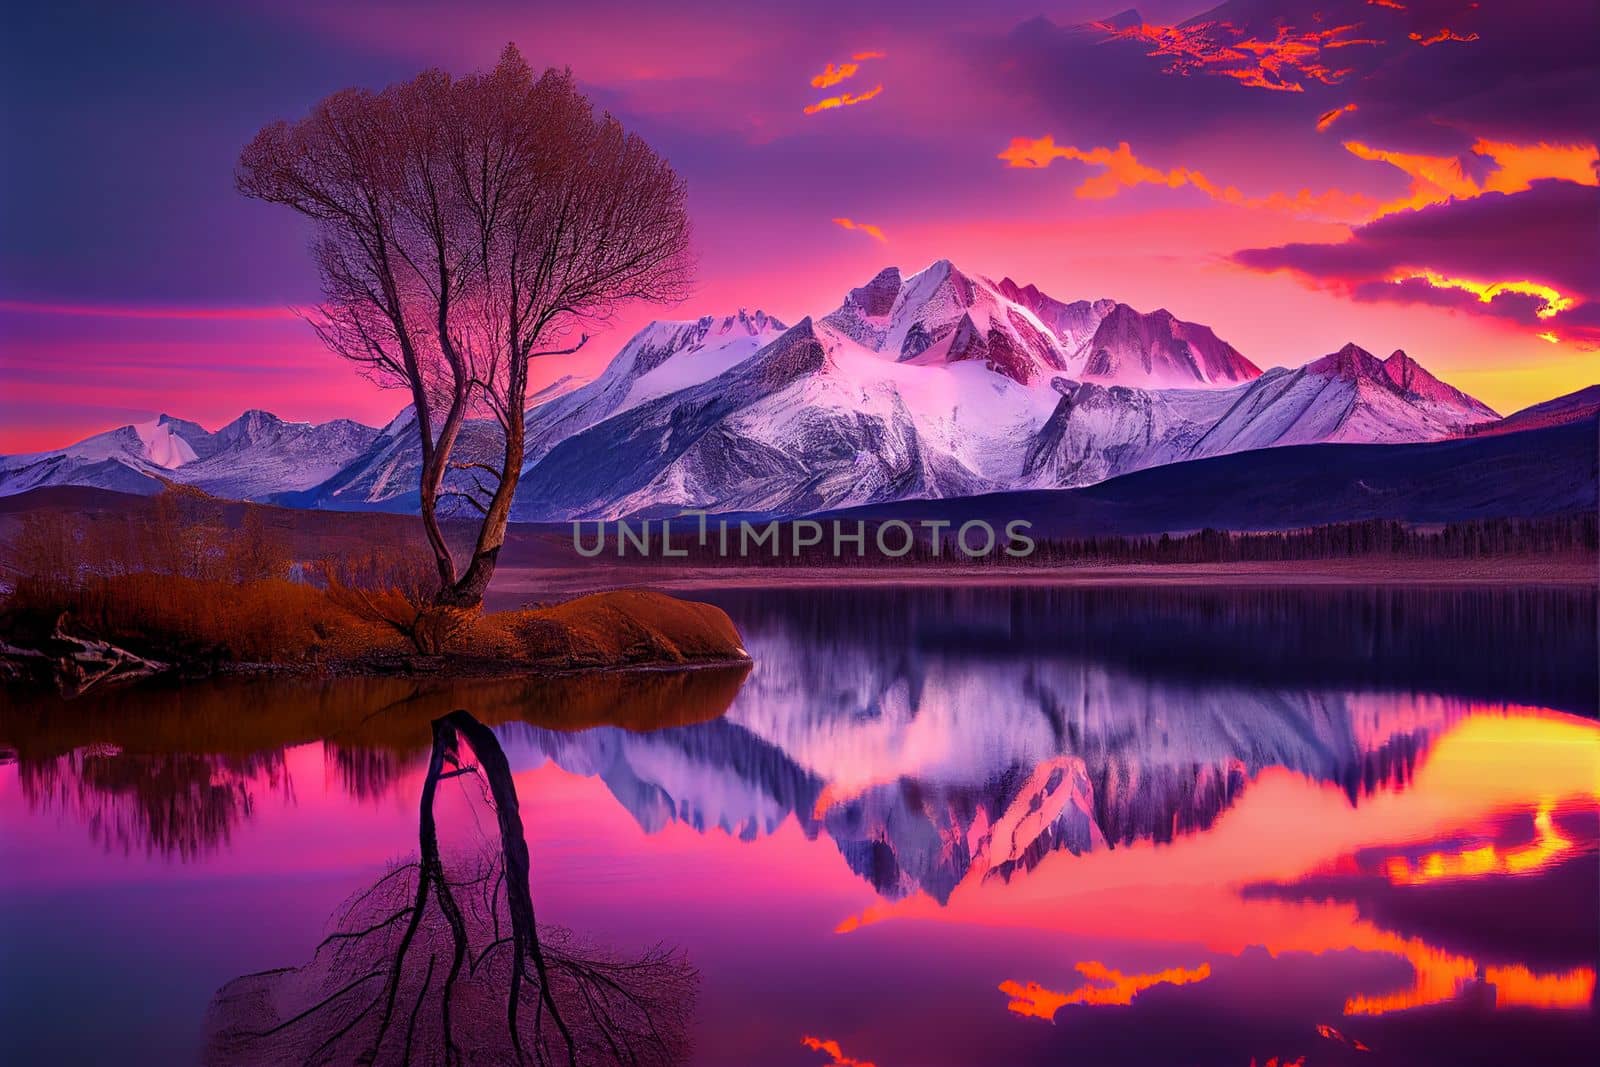 Sunrise over snowy mountain peaks with vibrant orange, pink, and purple skies. Tranquil lake in foreground with lone tree reaching towards the sky.